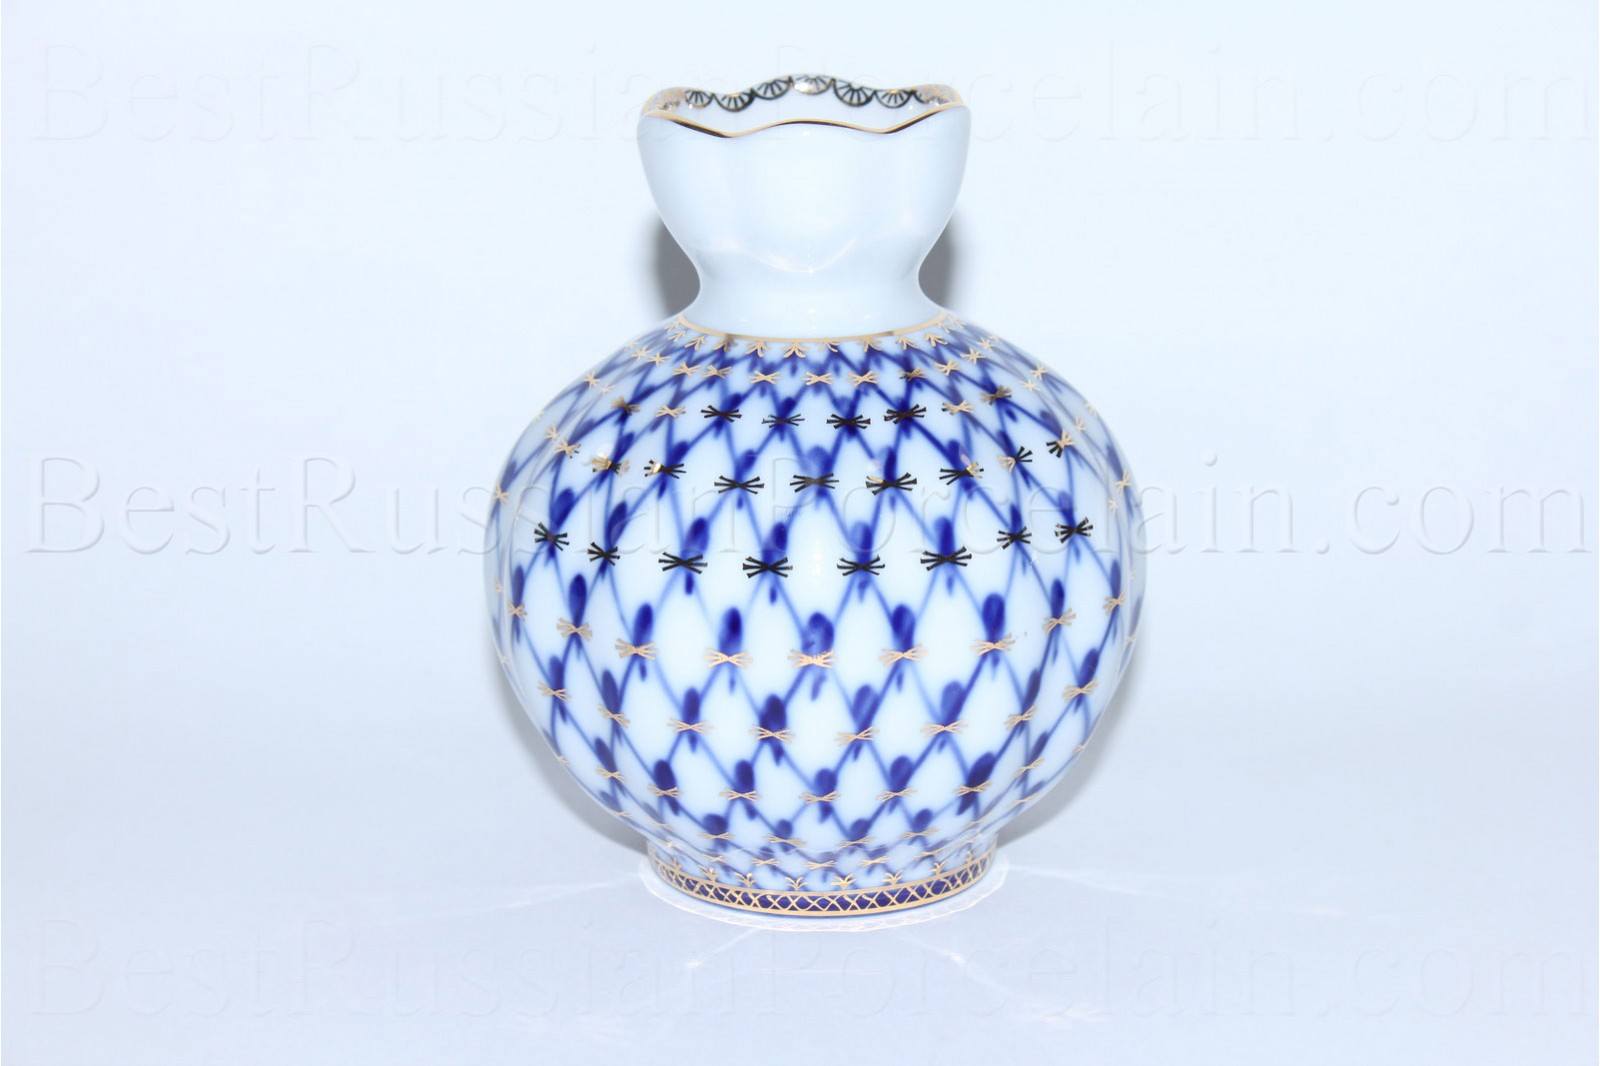 Table Decor Cobalt Net White and Blue  FLOWERS VASE by Imperial Porcelain 